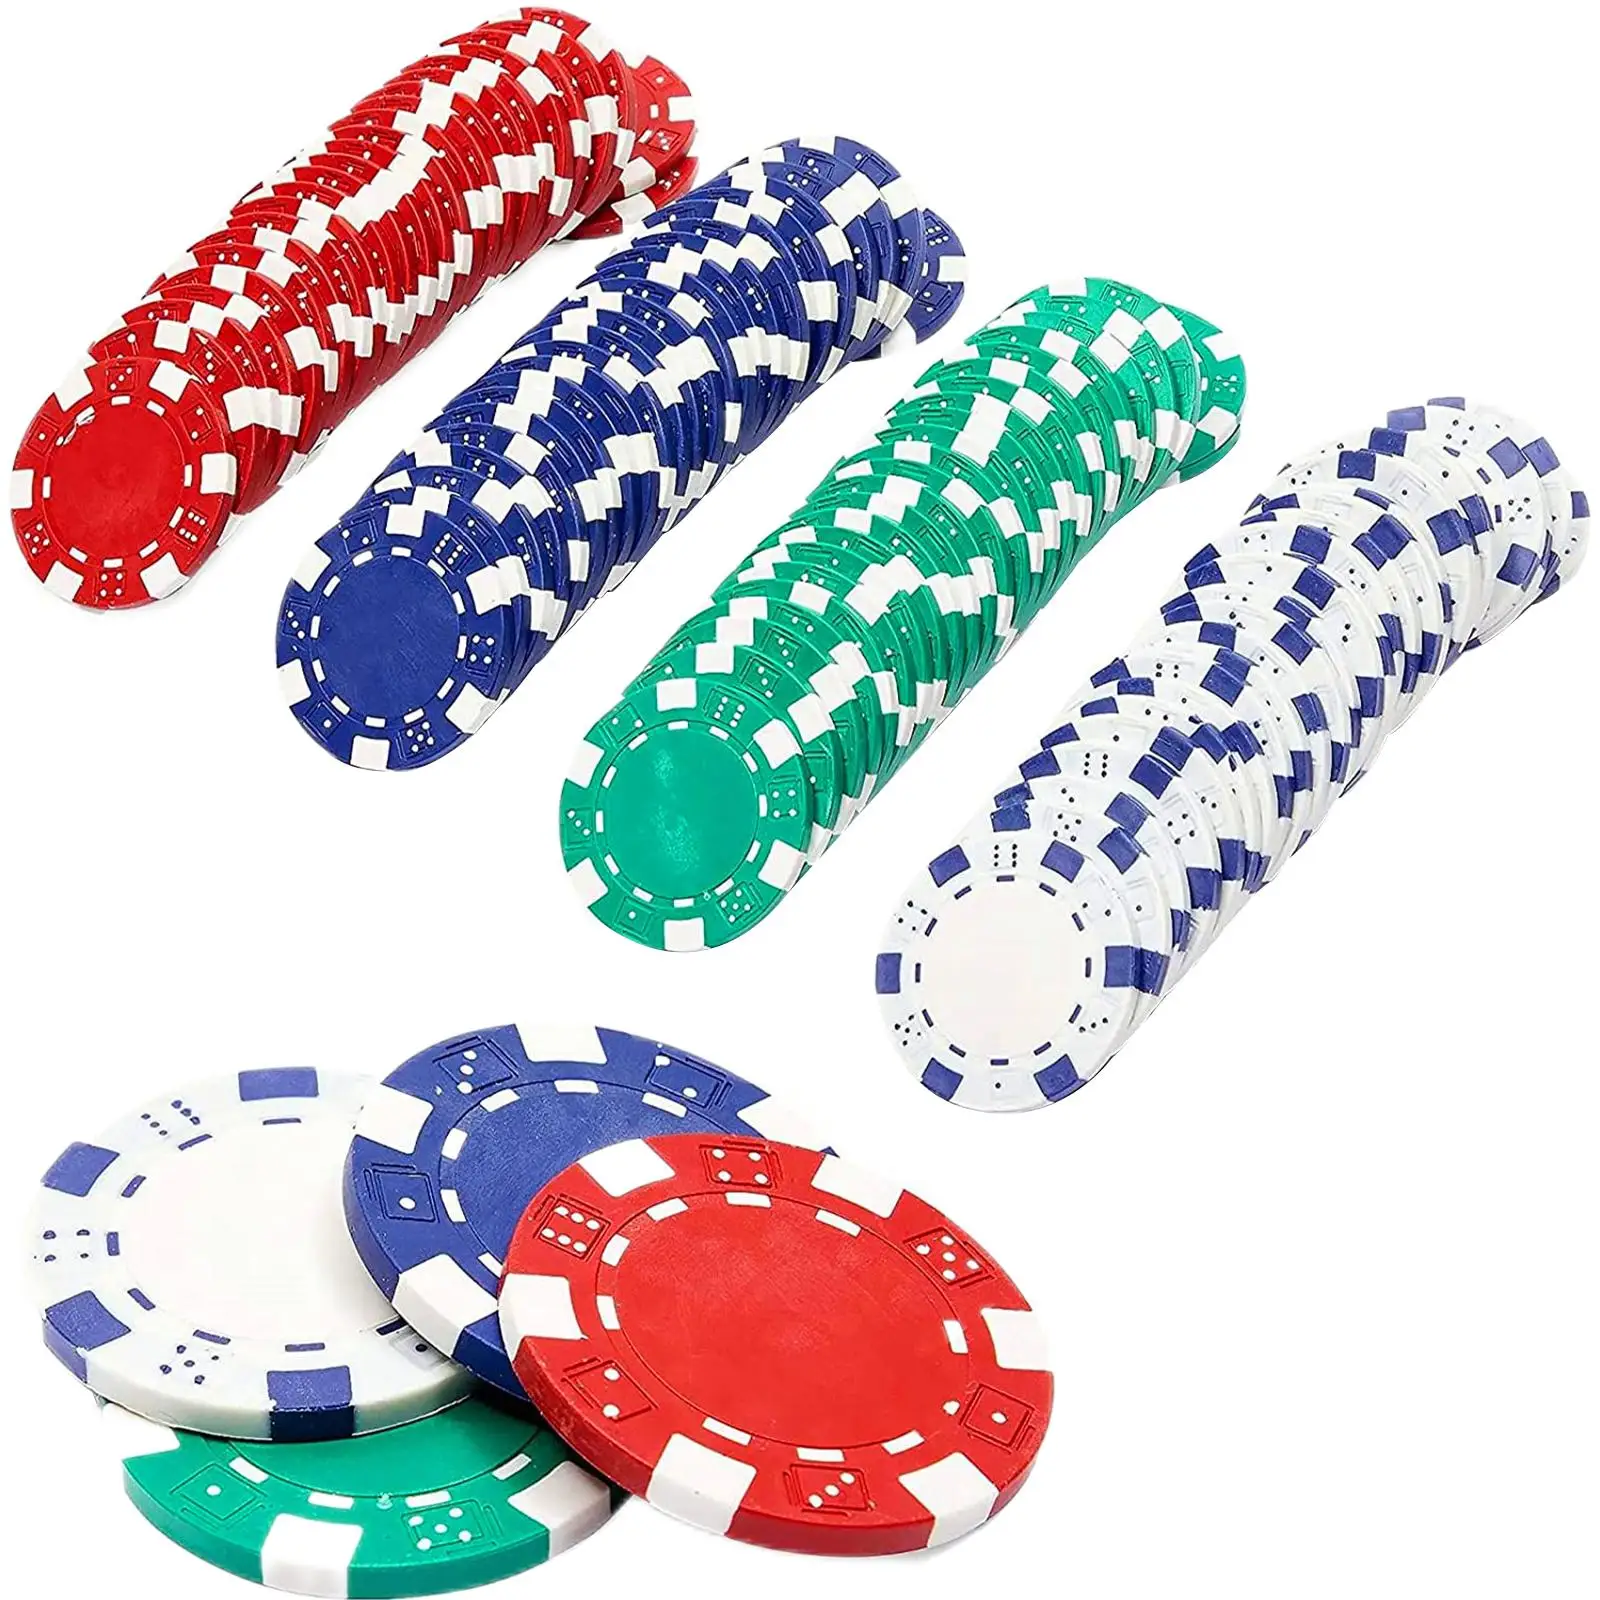 100x ABS Poker Chips Colored Game Tokens Durable Premium Bingo Chips Markers for Carnival Board Games Counting Supplies Accs